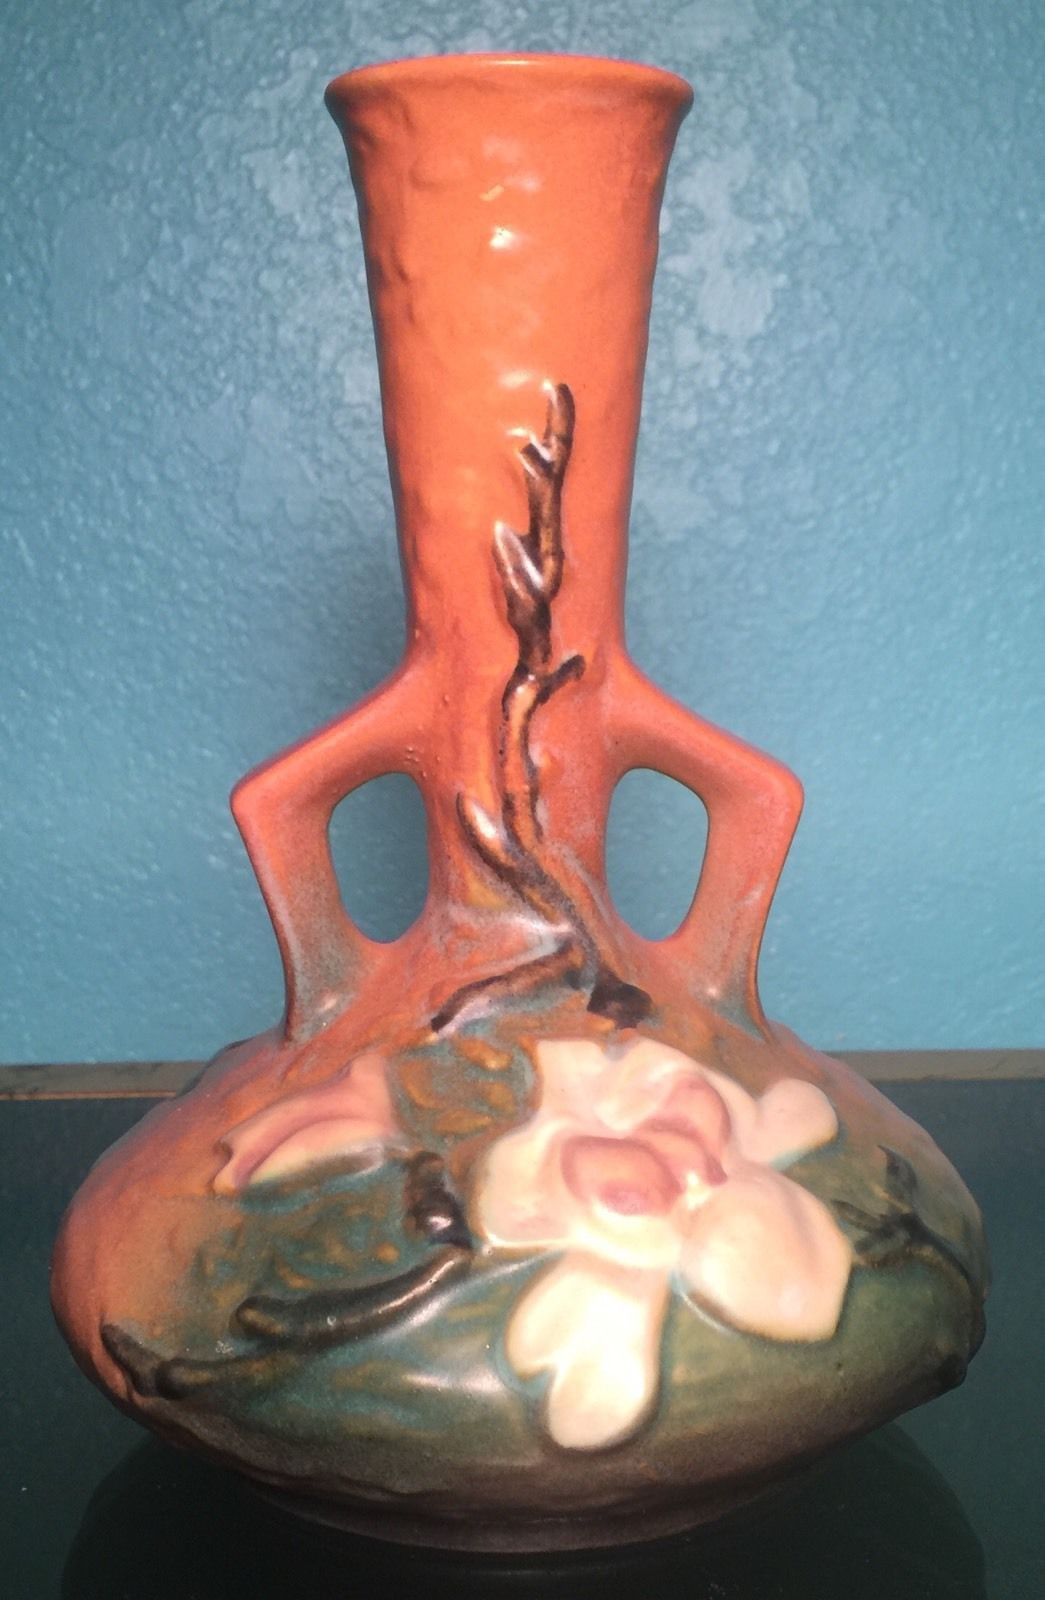 roseville double bud vase of roseville pottery usa bud vase magnolia pattern 80 00 picclick regarding roseville pottery usa bud vase magnolia pattern 1 of 8only 1 available